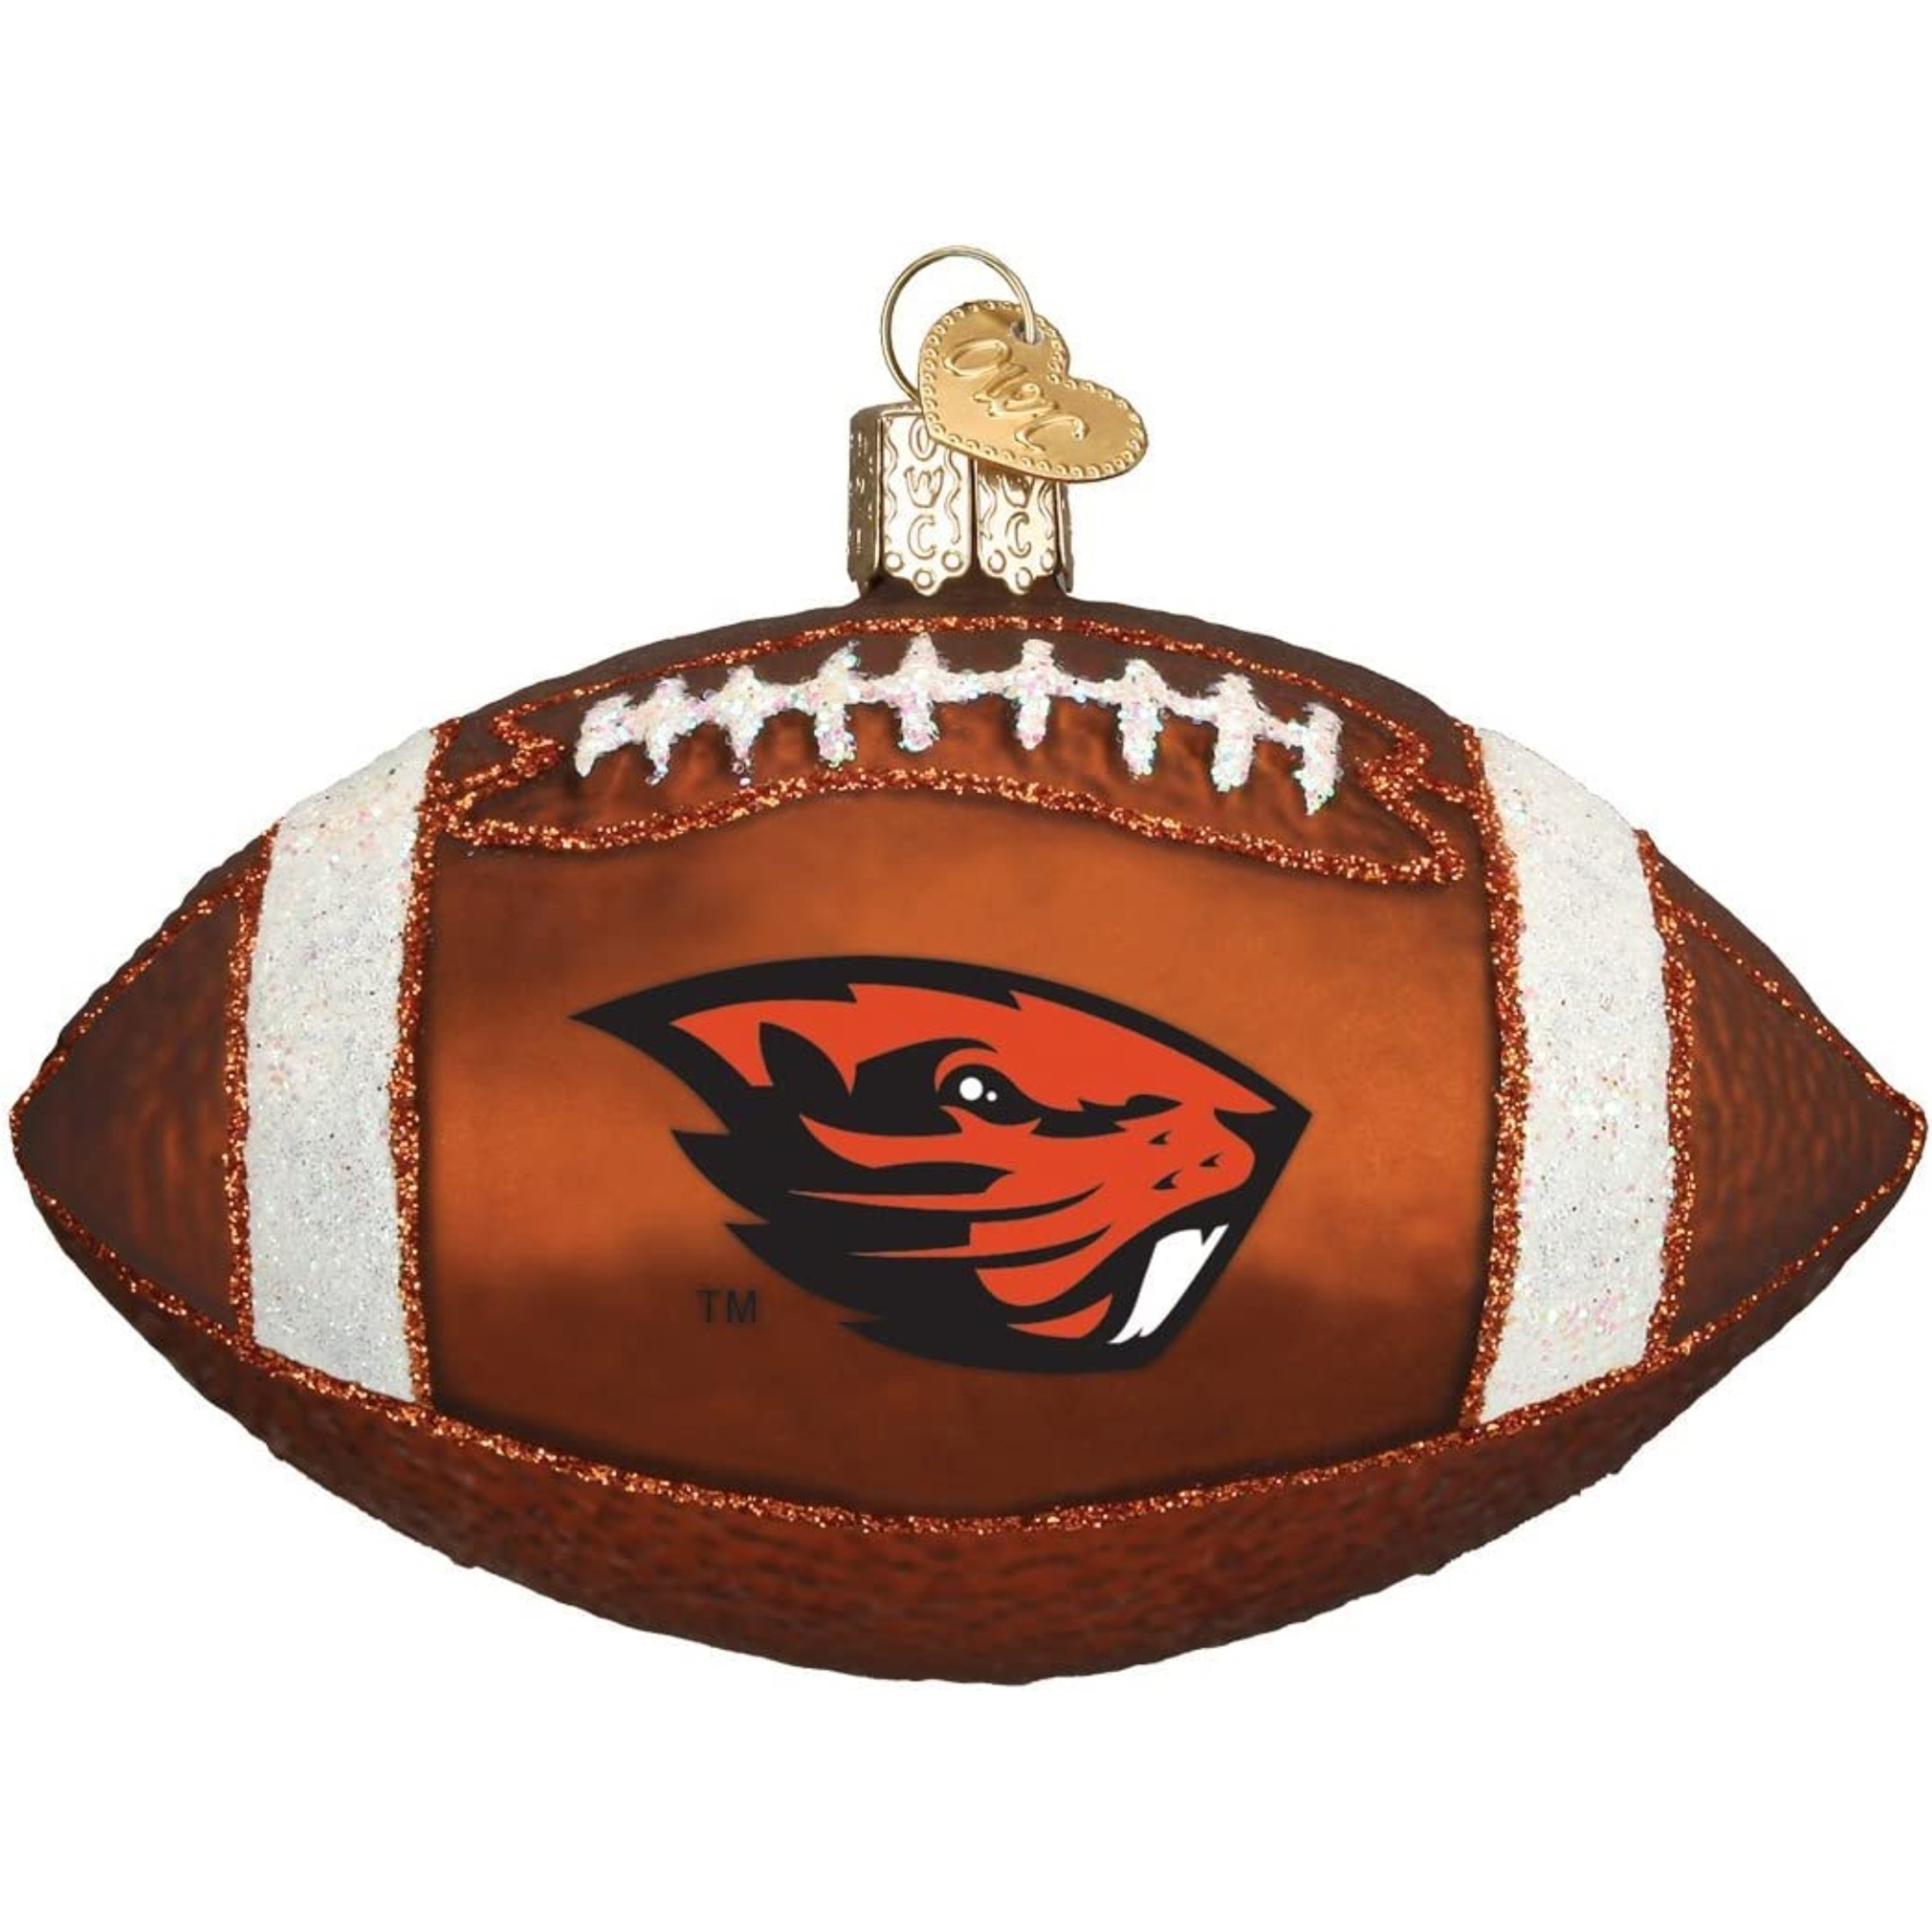 Old World Christmas Glass Blown Ornament for Tree, Oregon State Beaver Football (With OWC Gift Box)